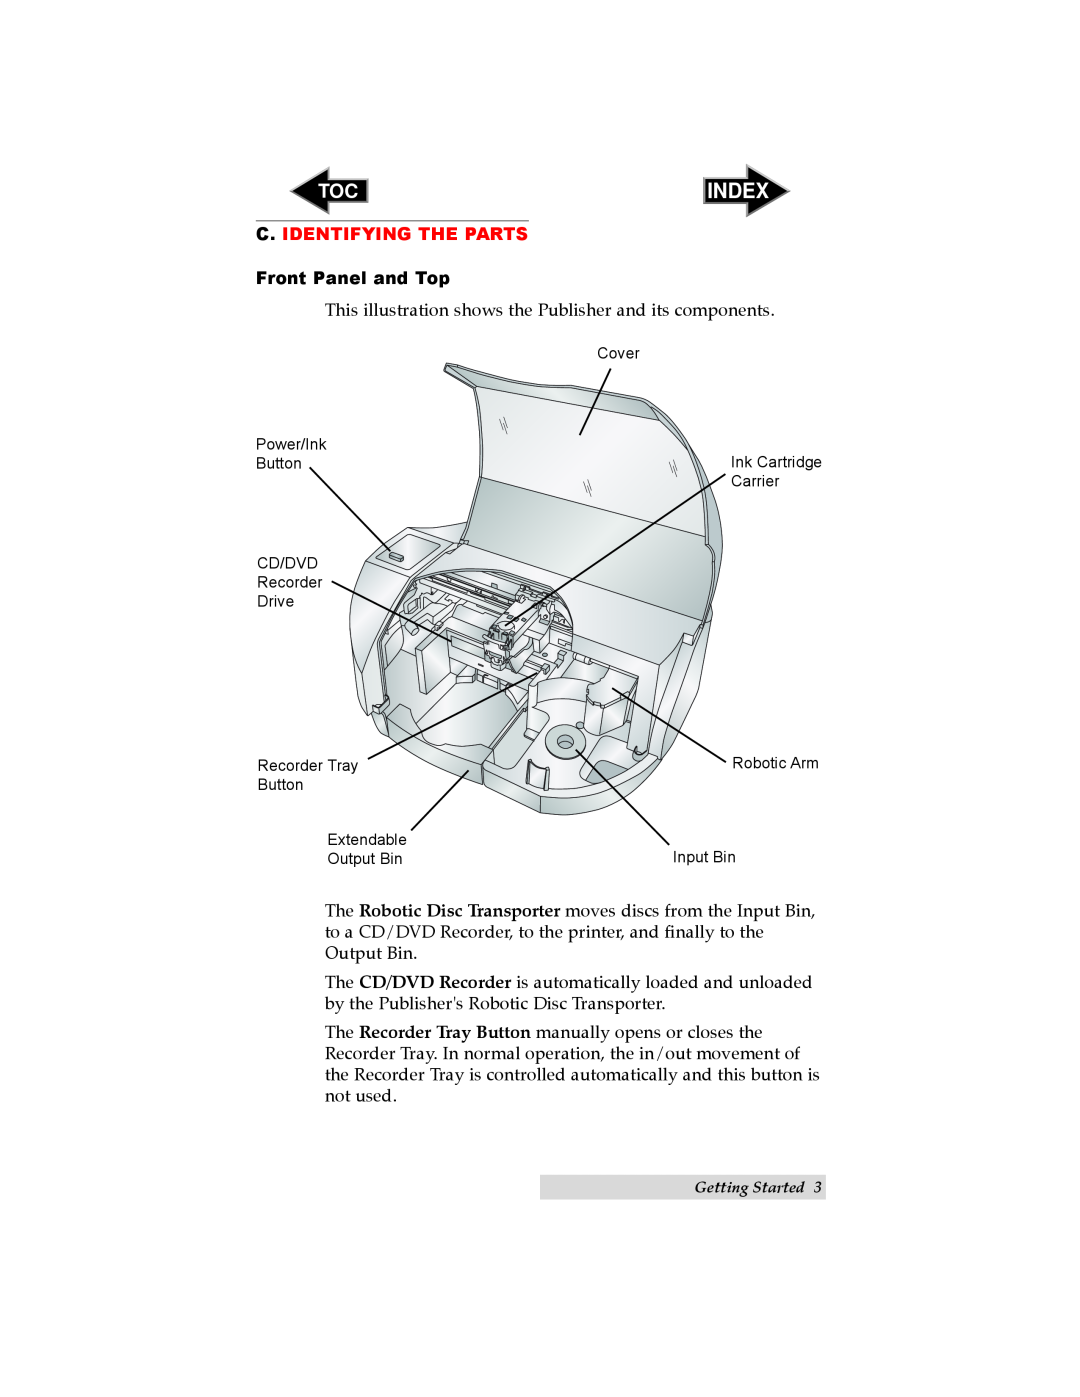 Primera Technology SE user manual C. Identifying The Parts, Front Panel and Top, Index 